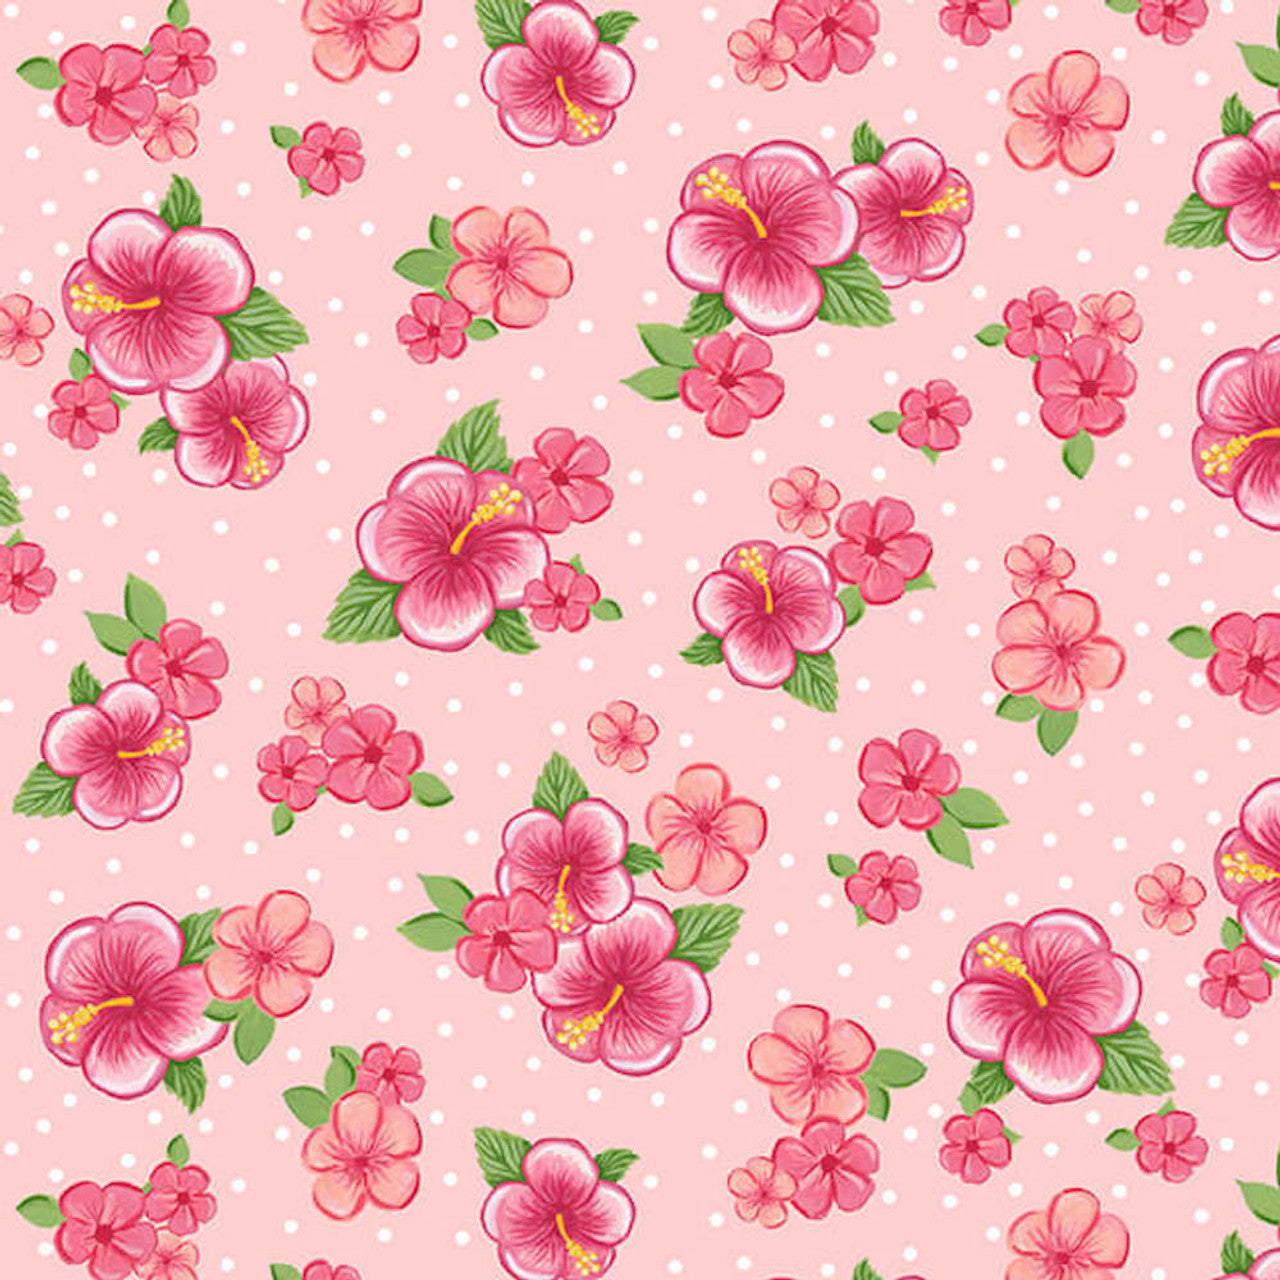 Blank Quilting Let's Flamingle Hibiscus Lt Pink Cotton Fabric